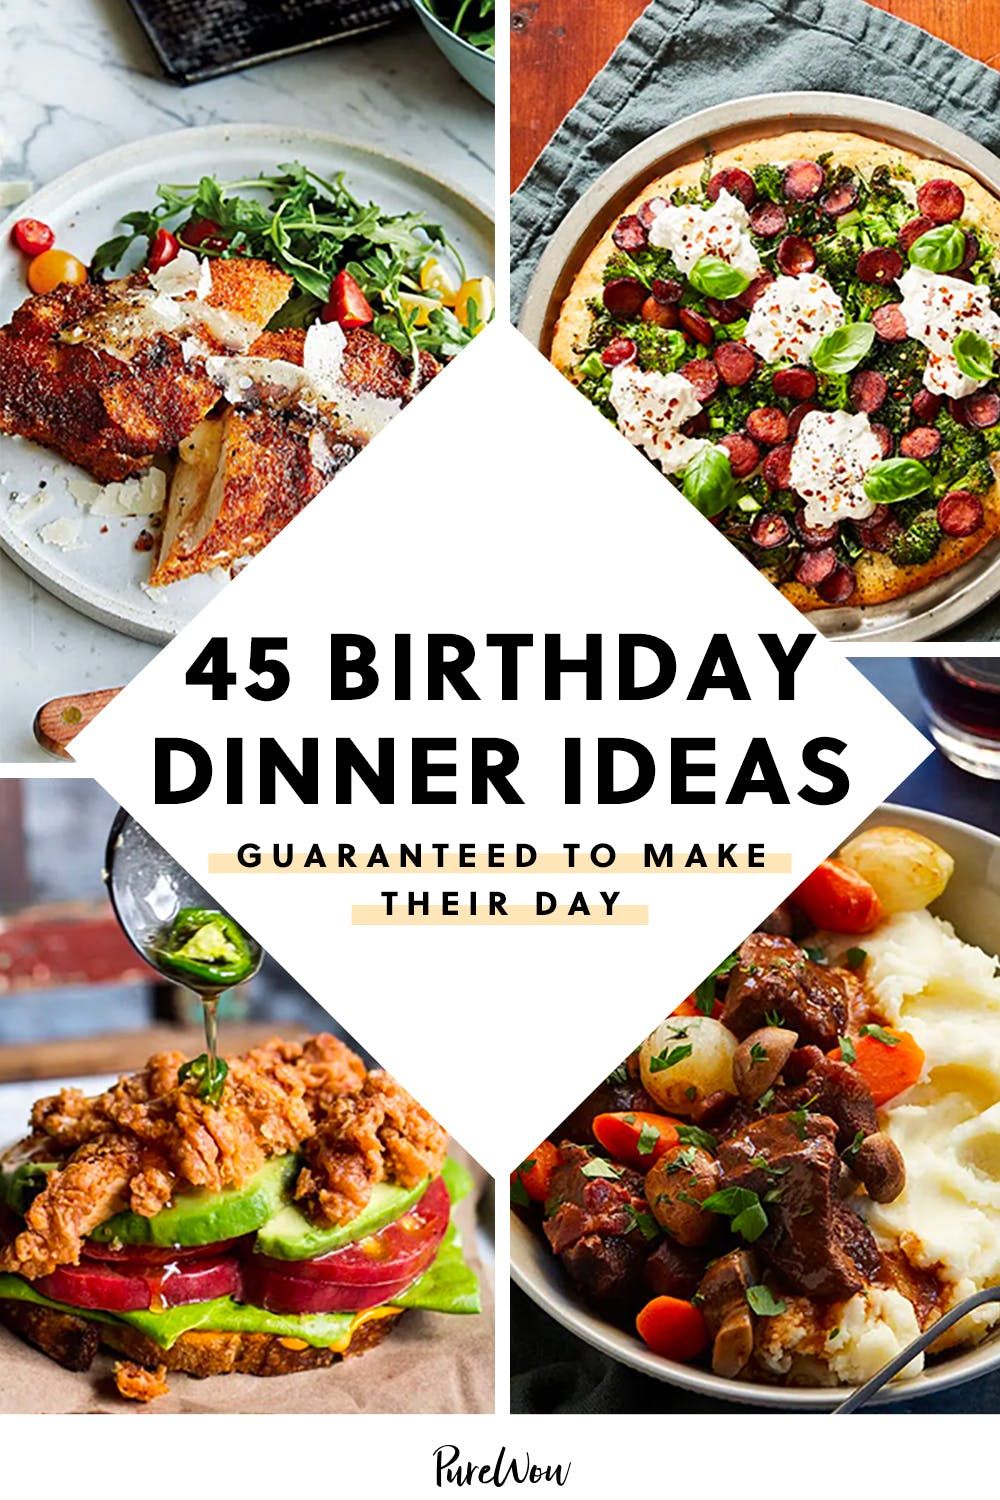 50 Birthday Dinner Ideas Guaranteed to Make Their Day #purewow #dinner